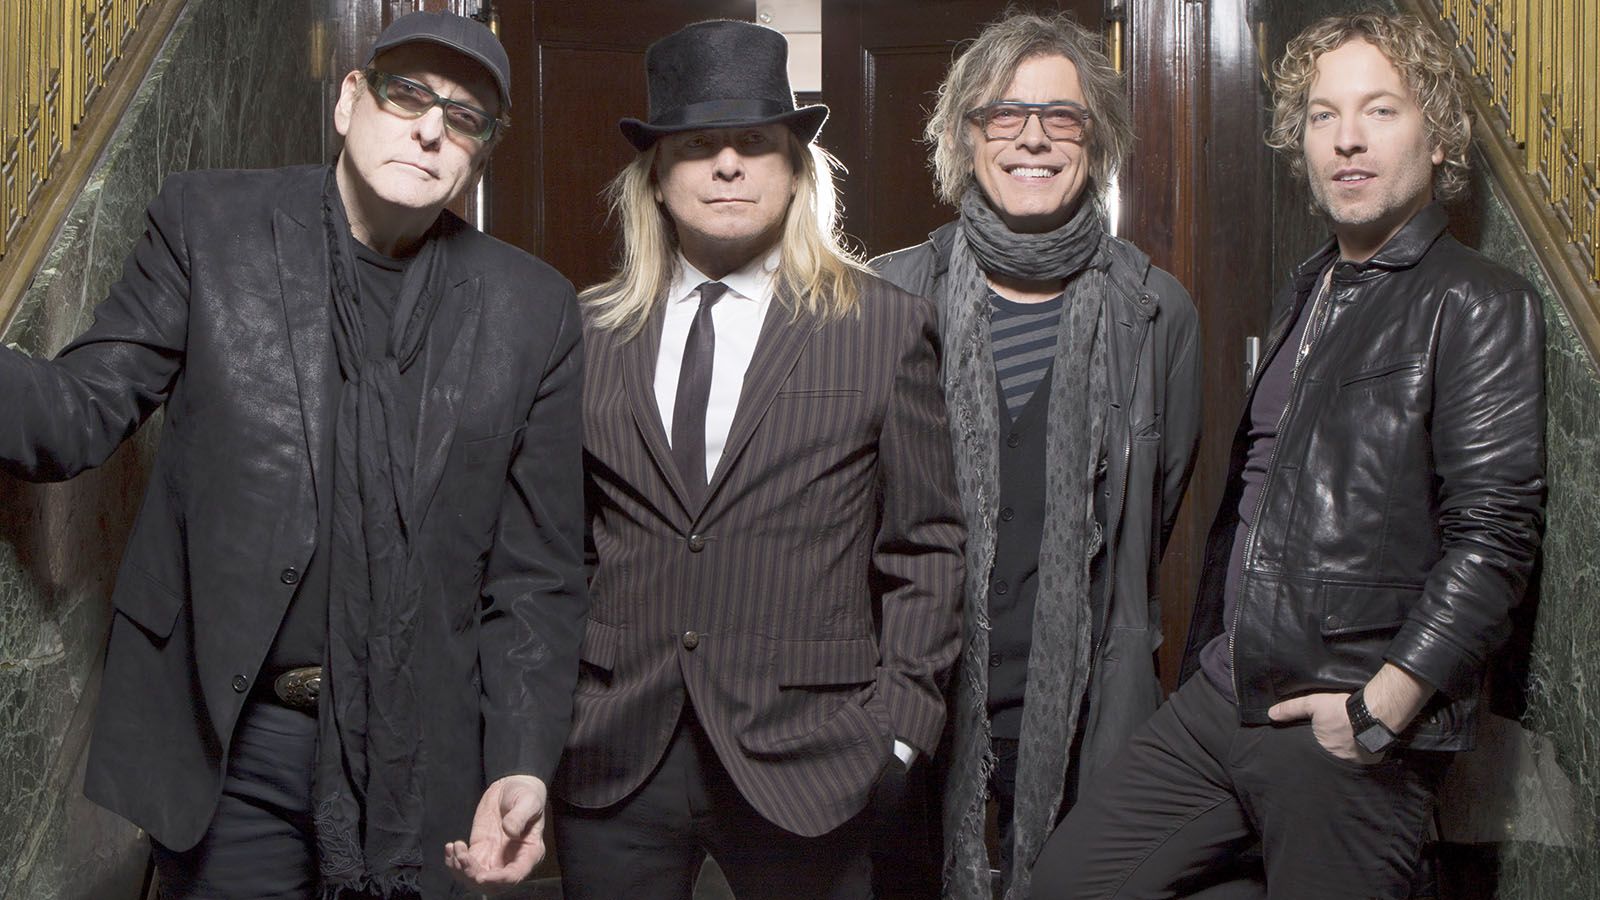 Rock and Roll Hall of Famers Cheap Trick will be at Honeywell Center in Wabash on April 19.